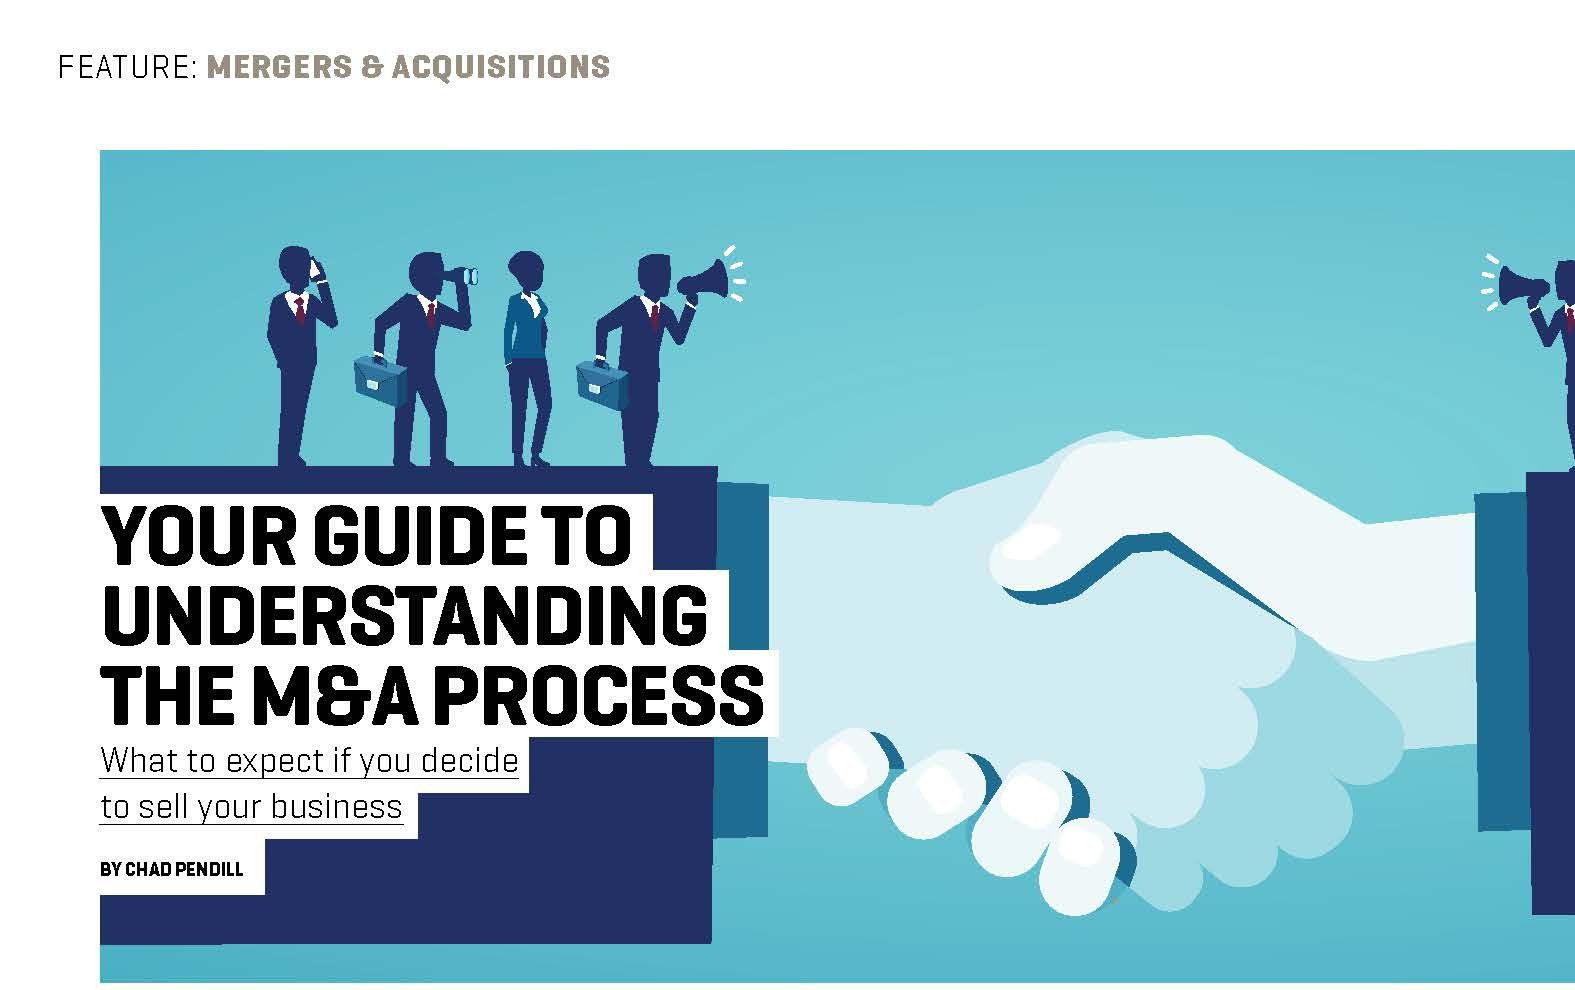 YOUR GUIDE TO UNDERSTANDING THE M&A PROCESS